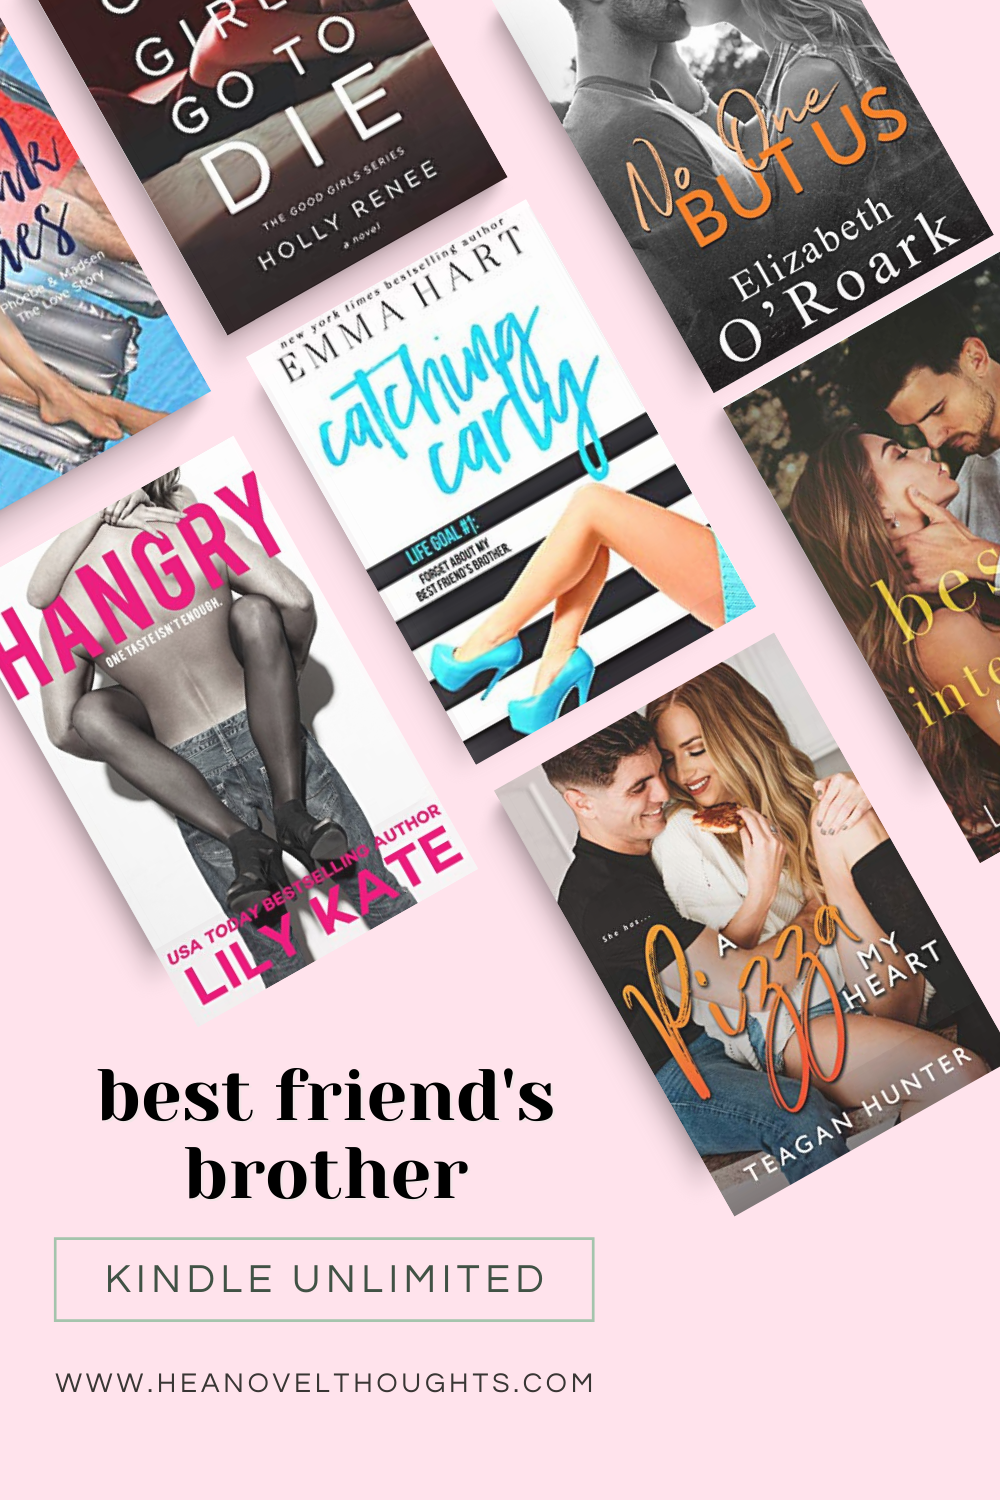 Best Friend’s Brother Kindle Unlimited Recommendations